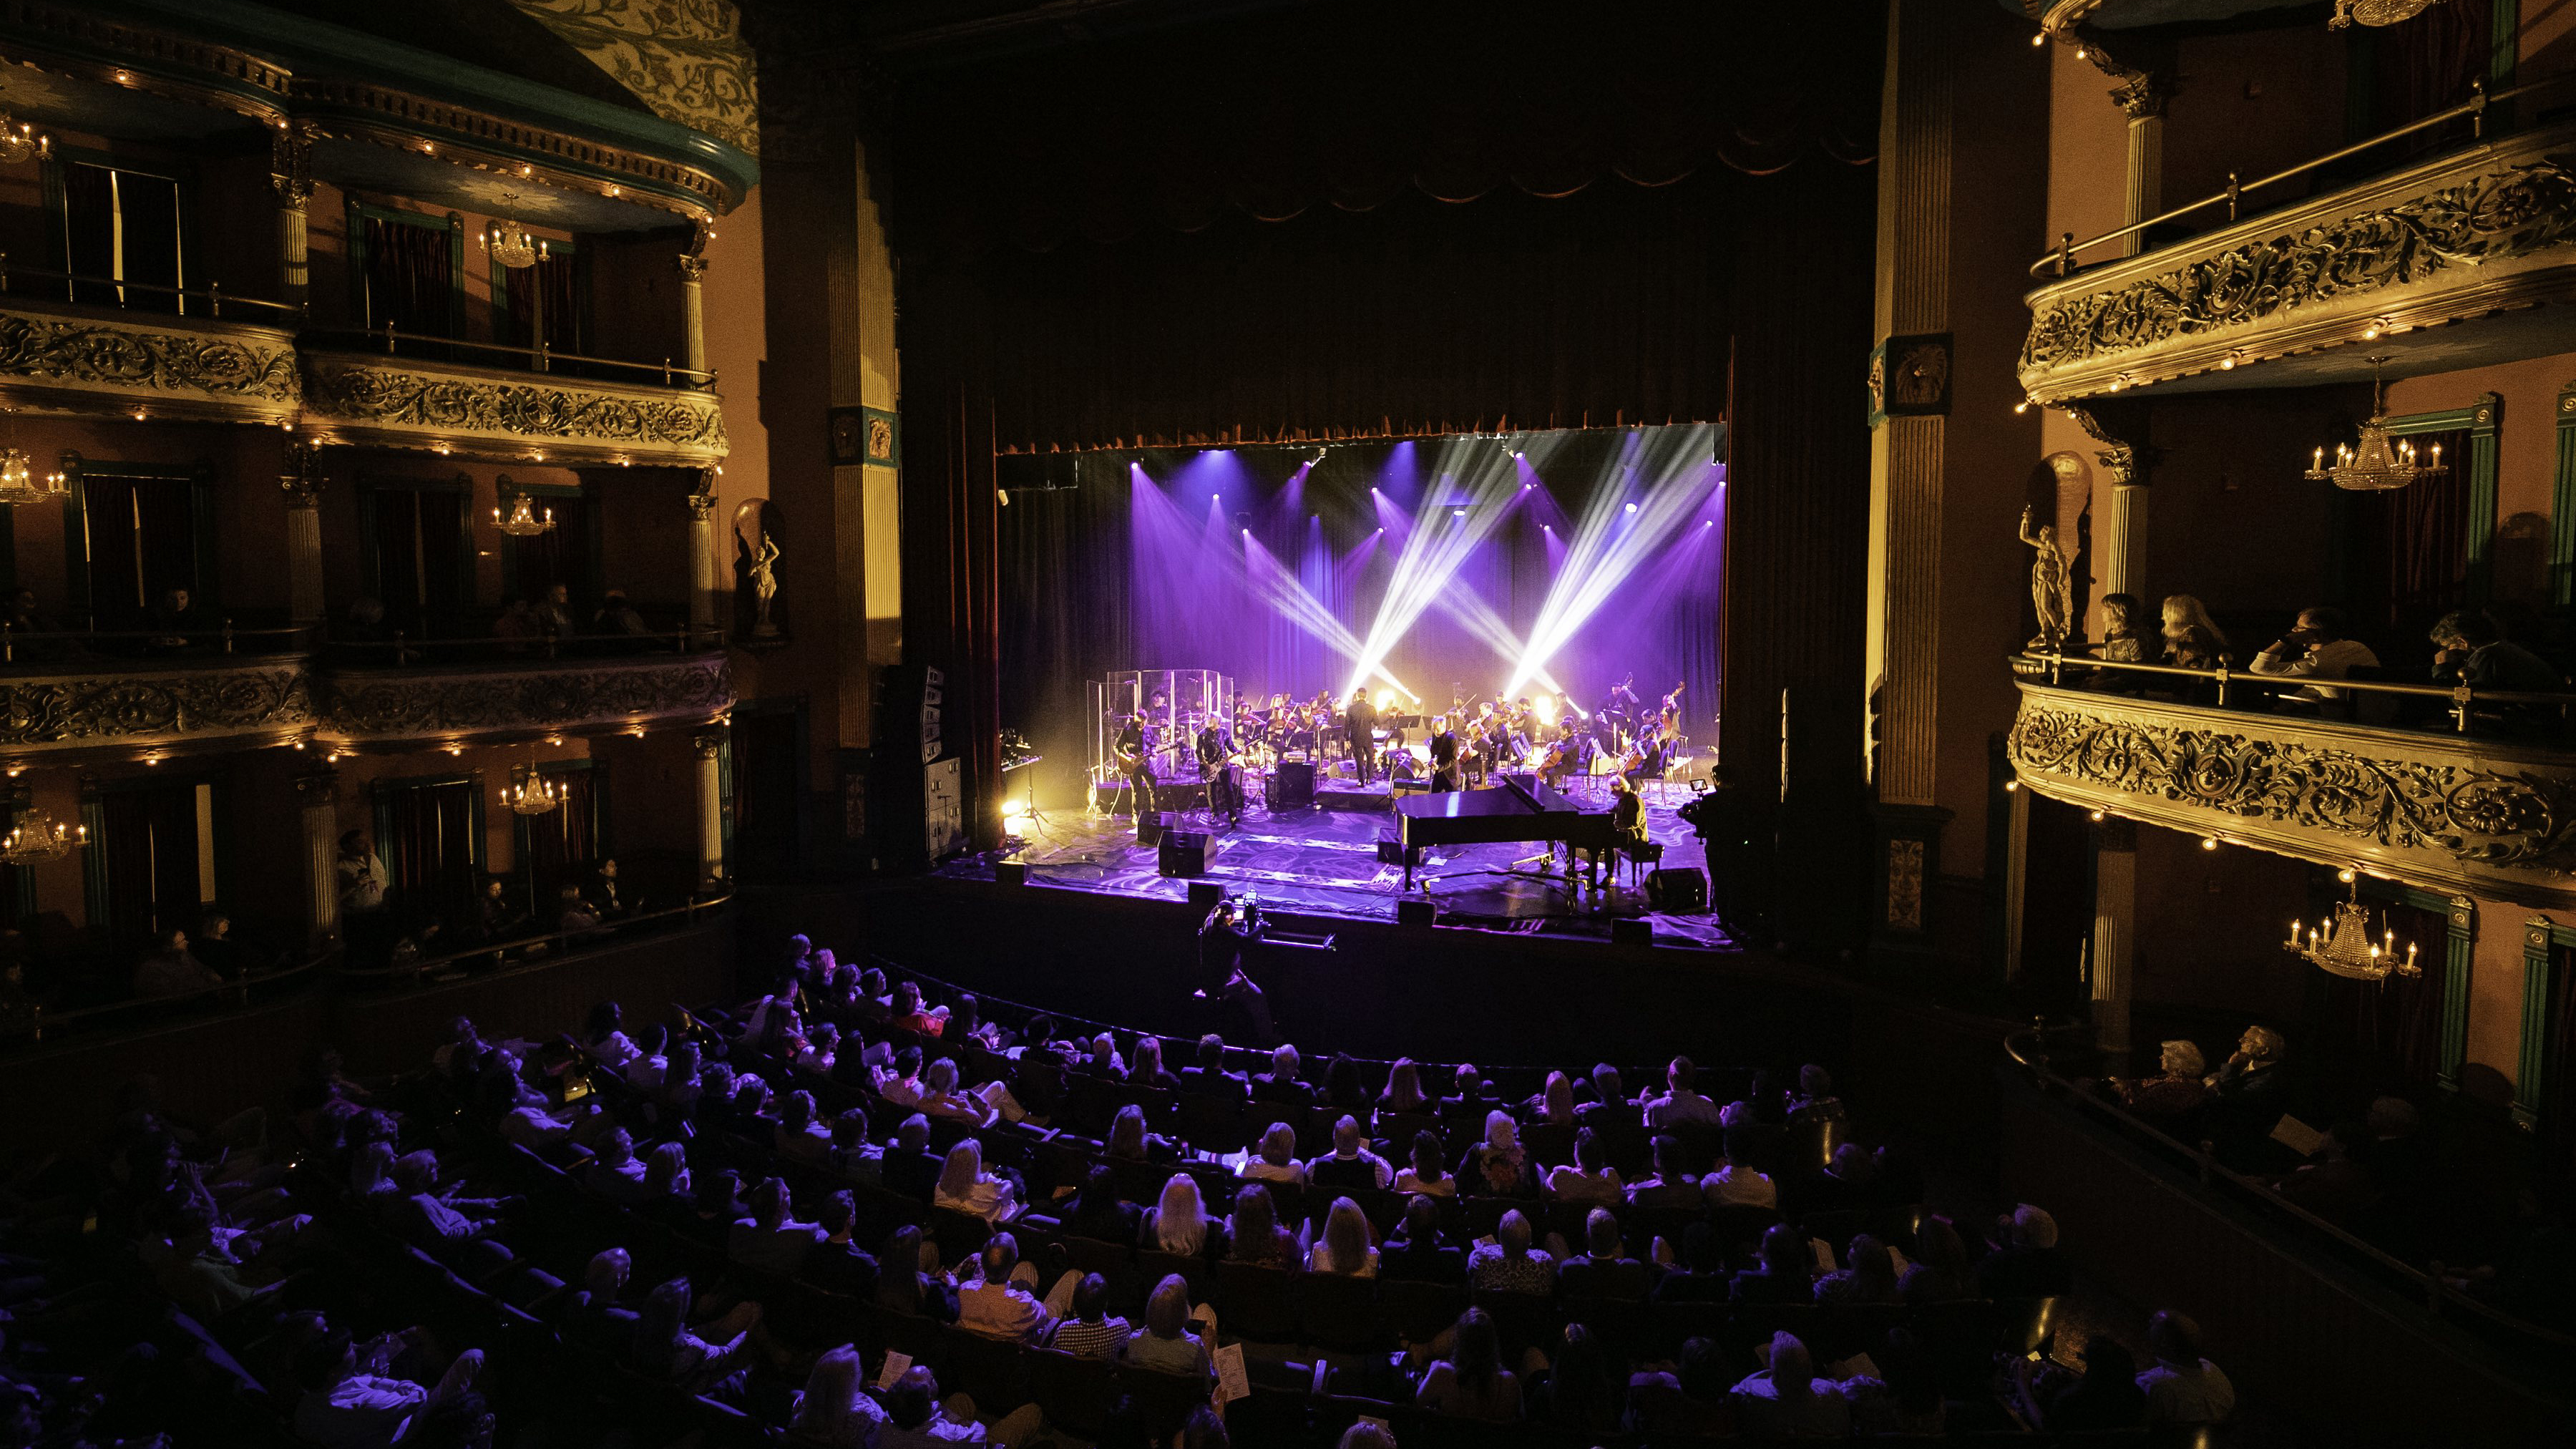 Stage shot from balcony during A Night of Georgia Music at The Grand Opera House in Macon, Ga. Credit: Christopher Ian Smith